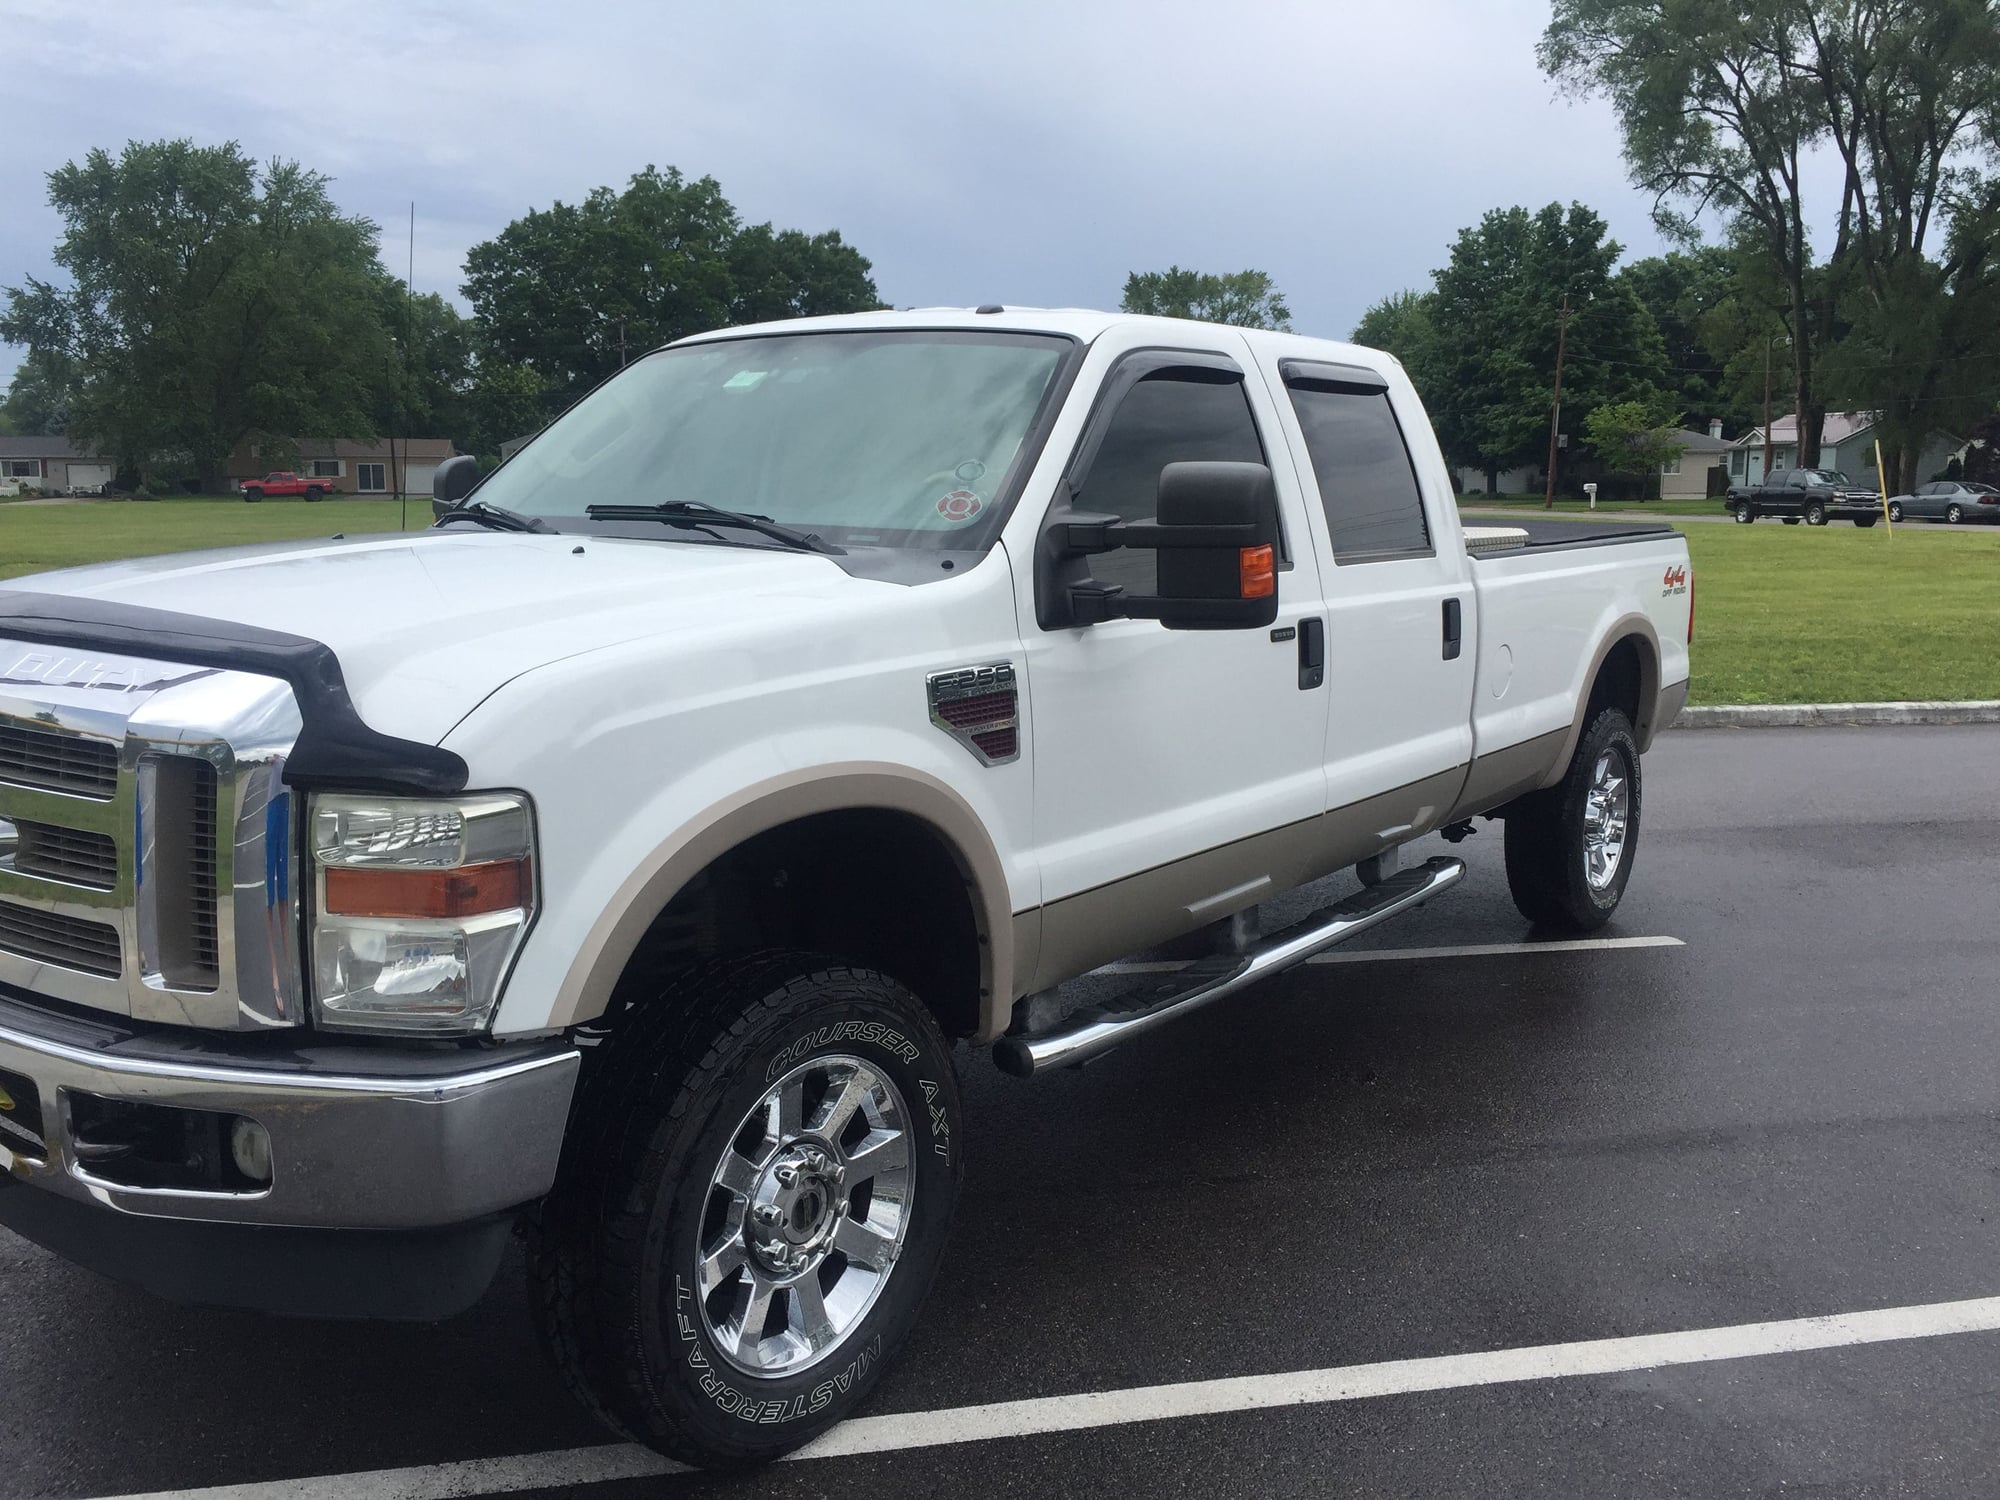 2009 Ford F-250 Super Duty - 2009 Ford F-250 Crew Cab Lariat 4x4  8' bed with a deleted 6.4 Powerstroke - Used - VIN 1FTSW21R09EA88516 - 8 cyl - 4WD - Automatic - Truck - White - Northern, IN 46544, United States